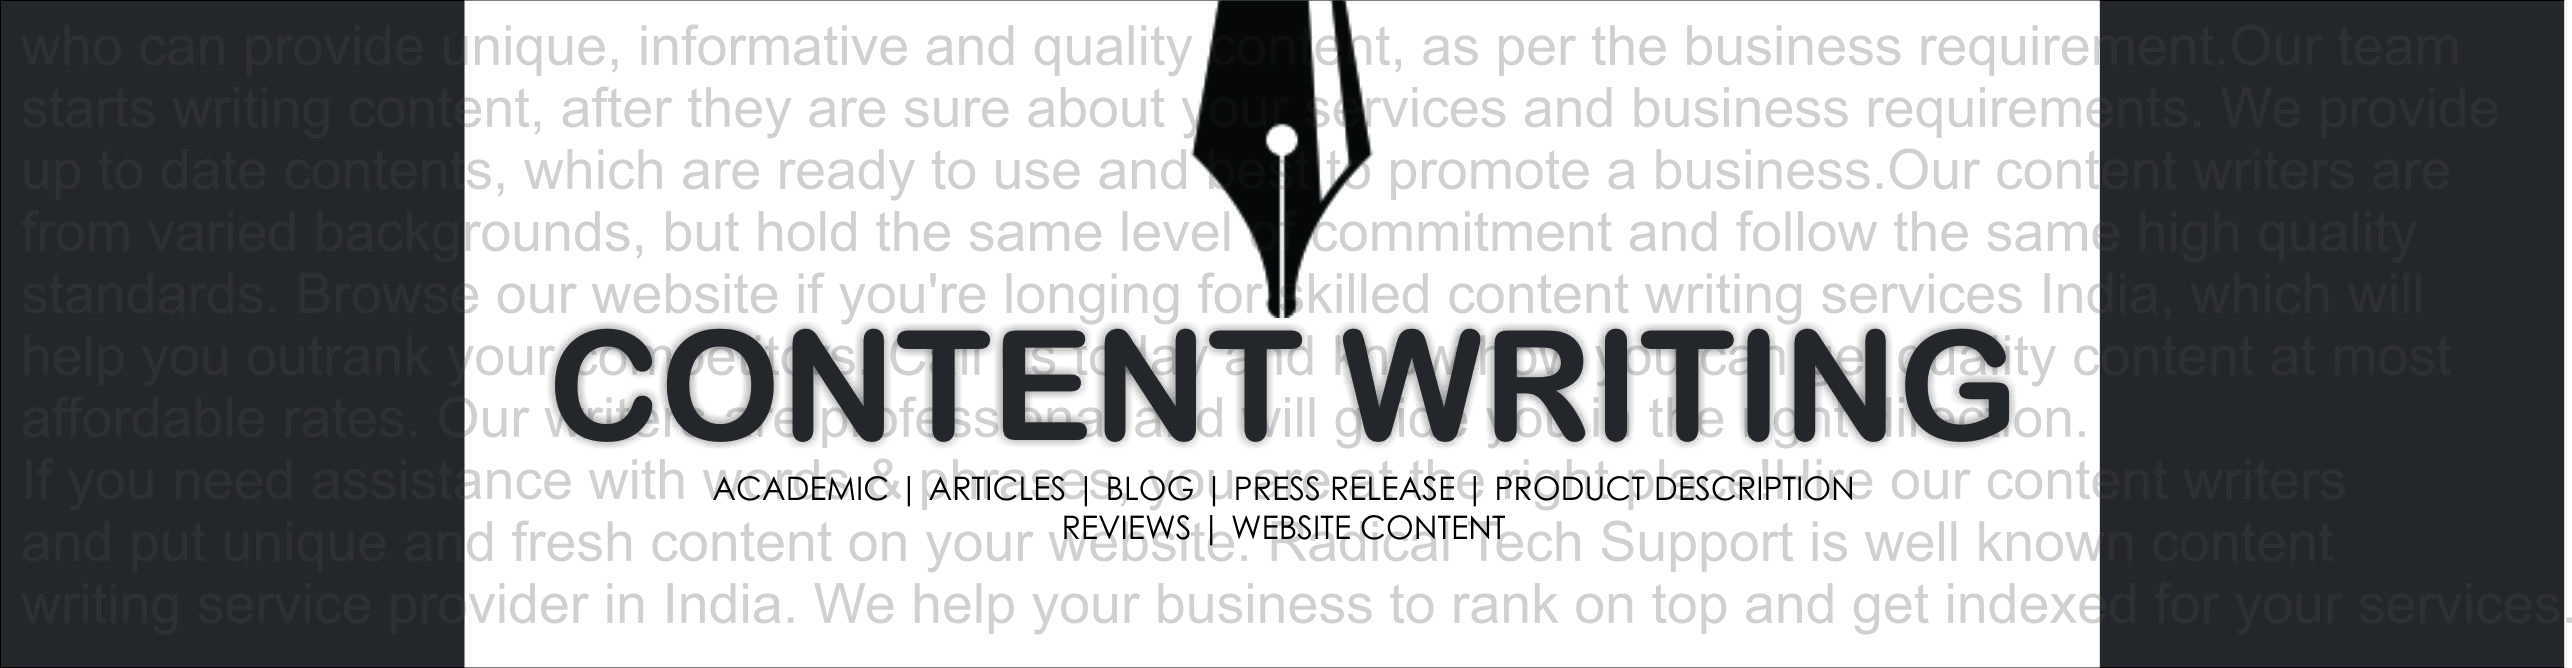 Blog writing services india